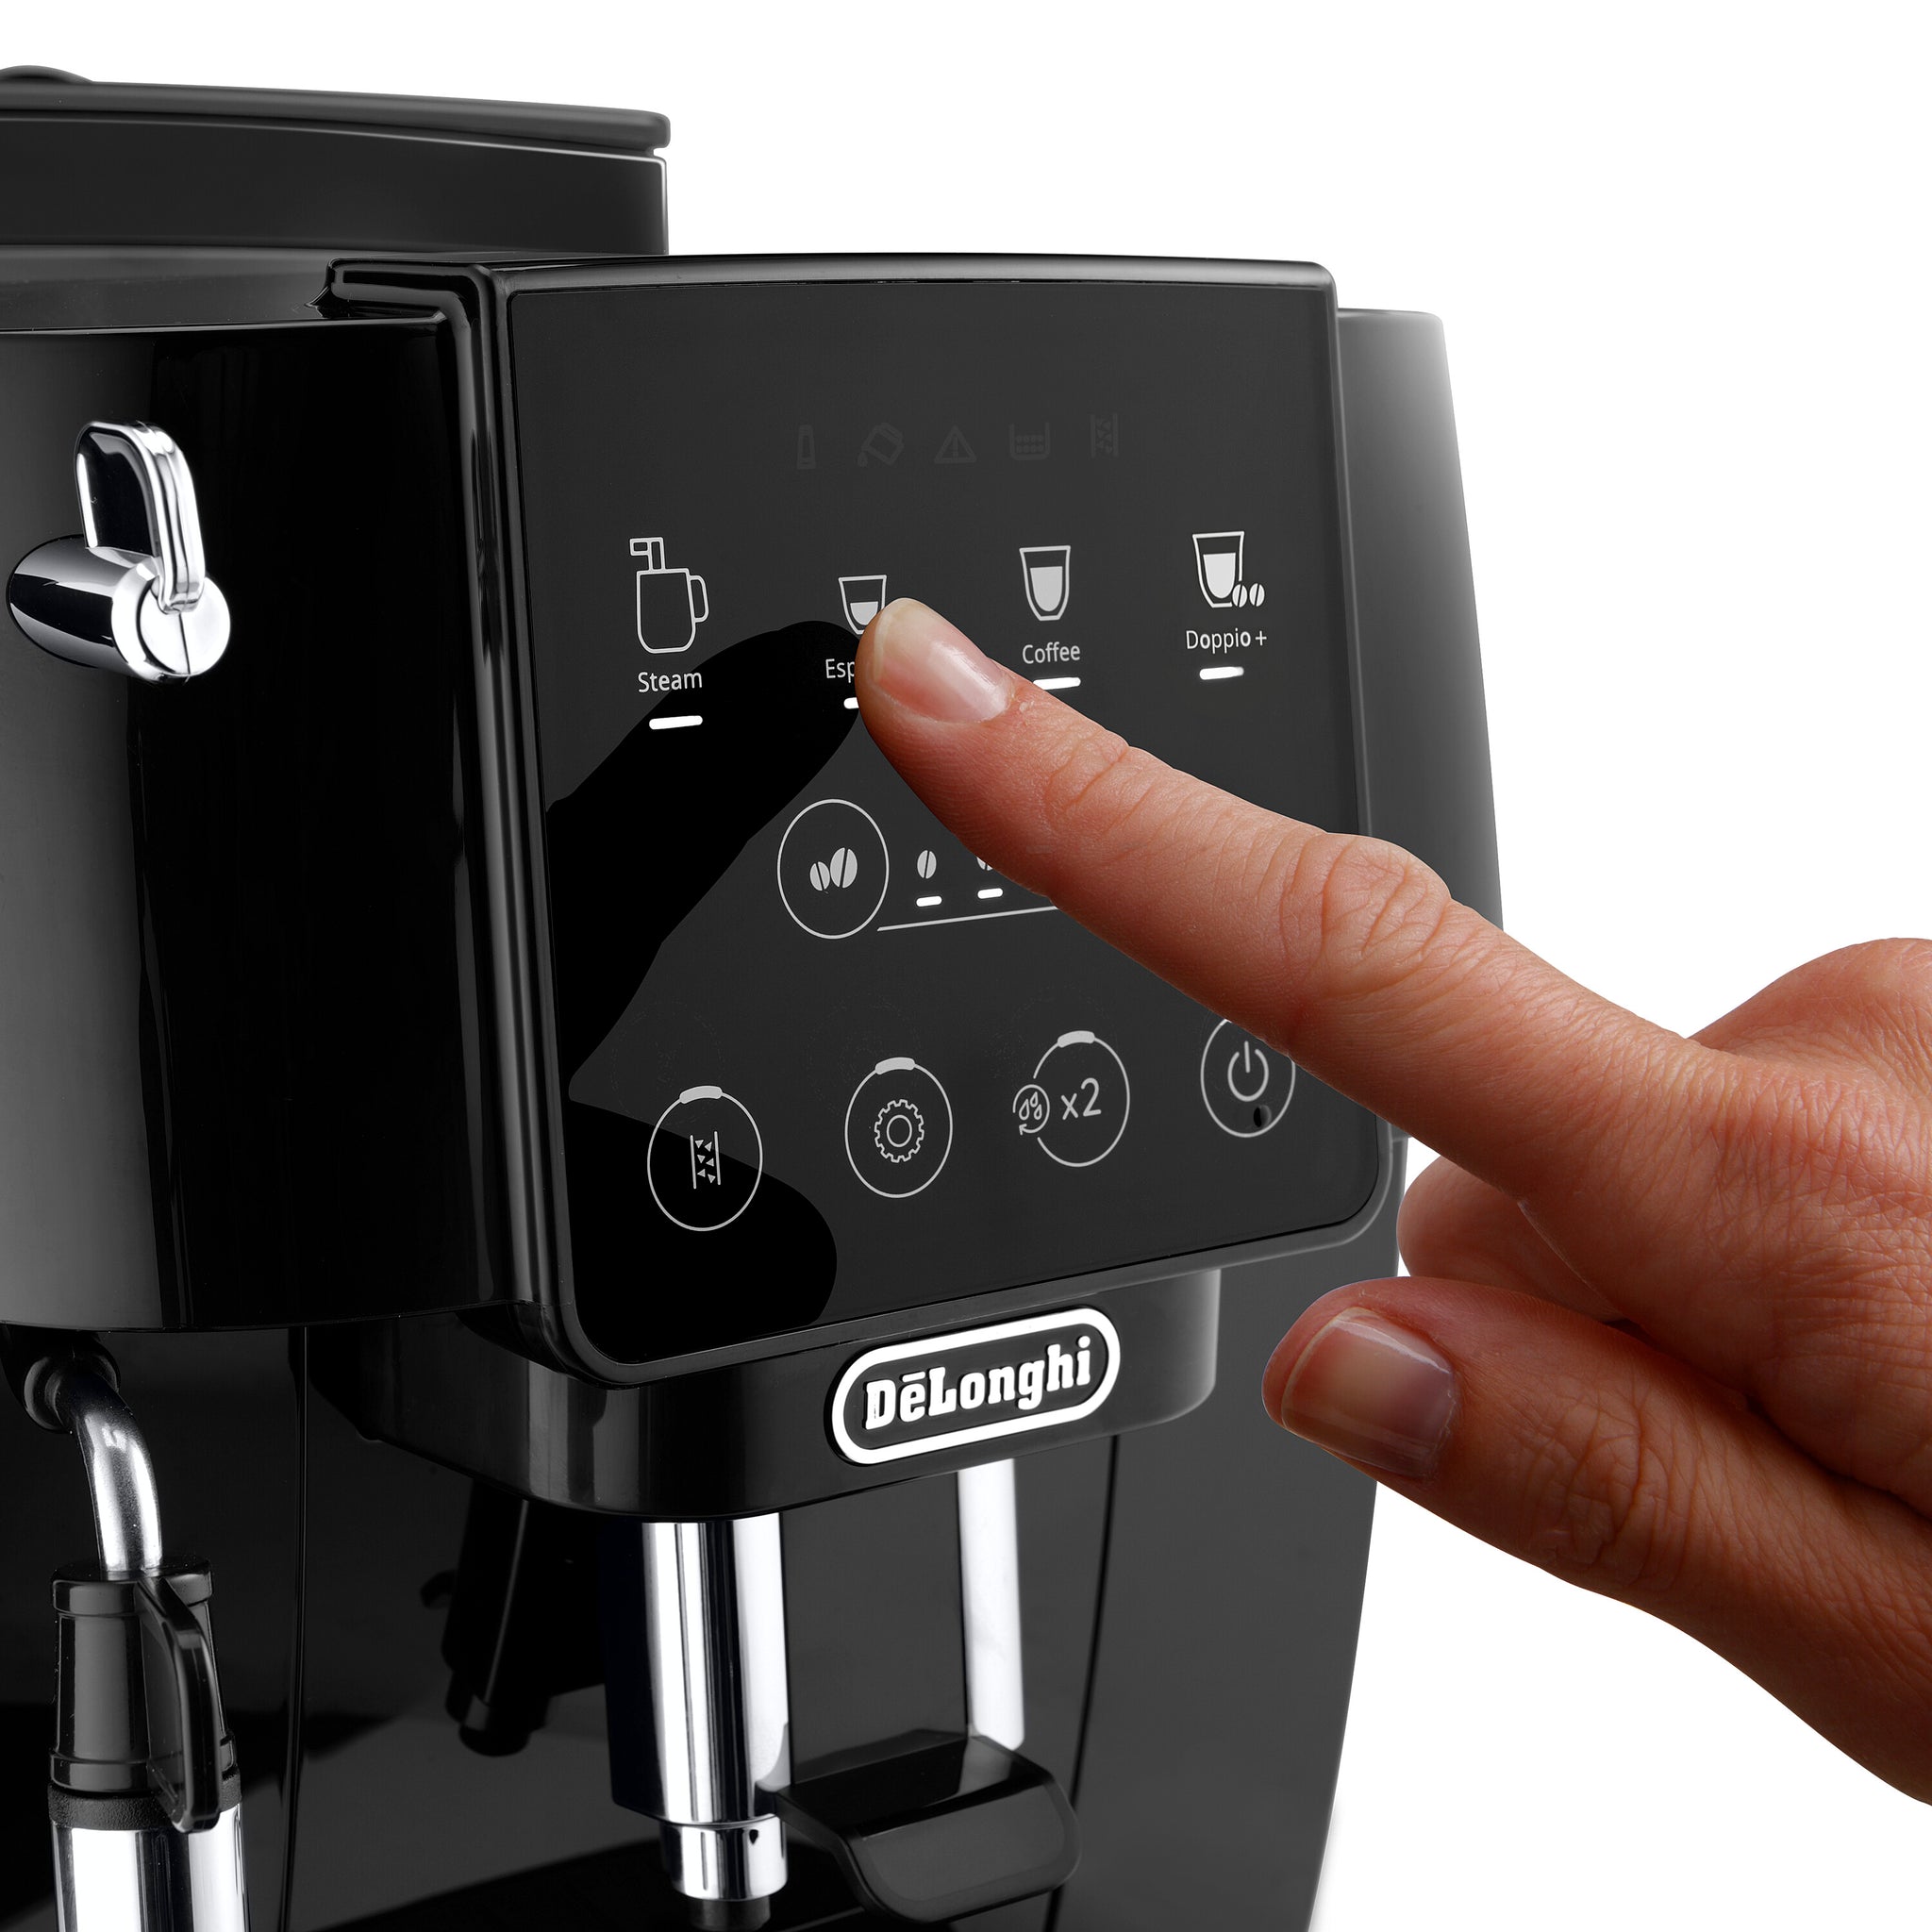 DeLonghi Magnifica Start ECAM220.60.B Fully Automatic Bean to Cup Machine +  Free tastecard with code